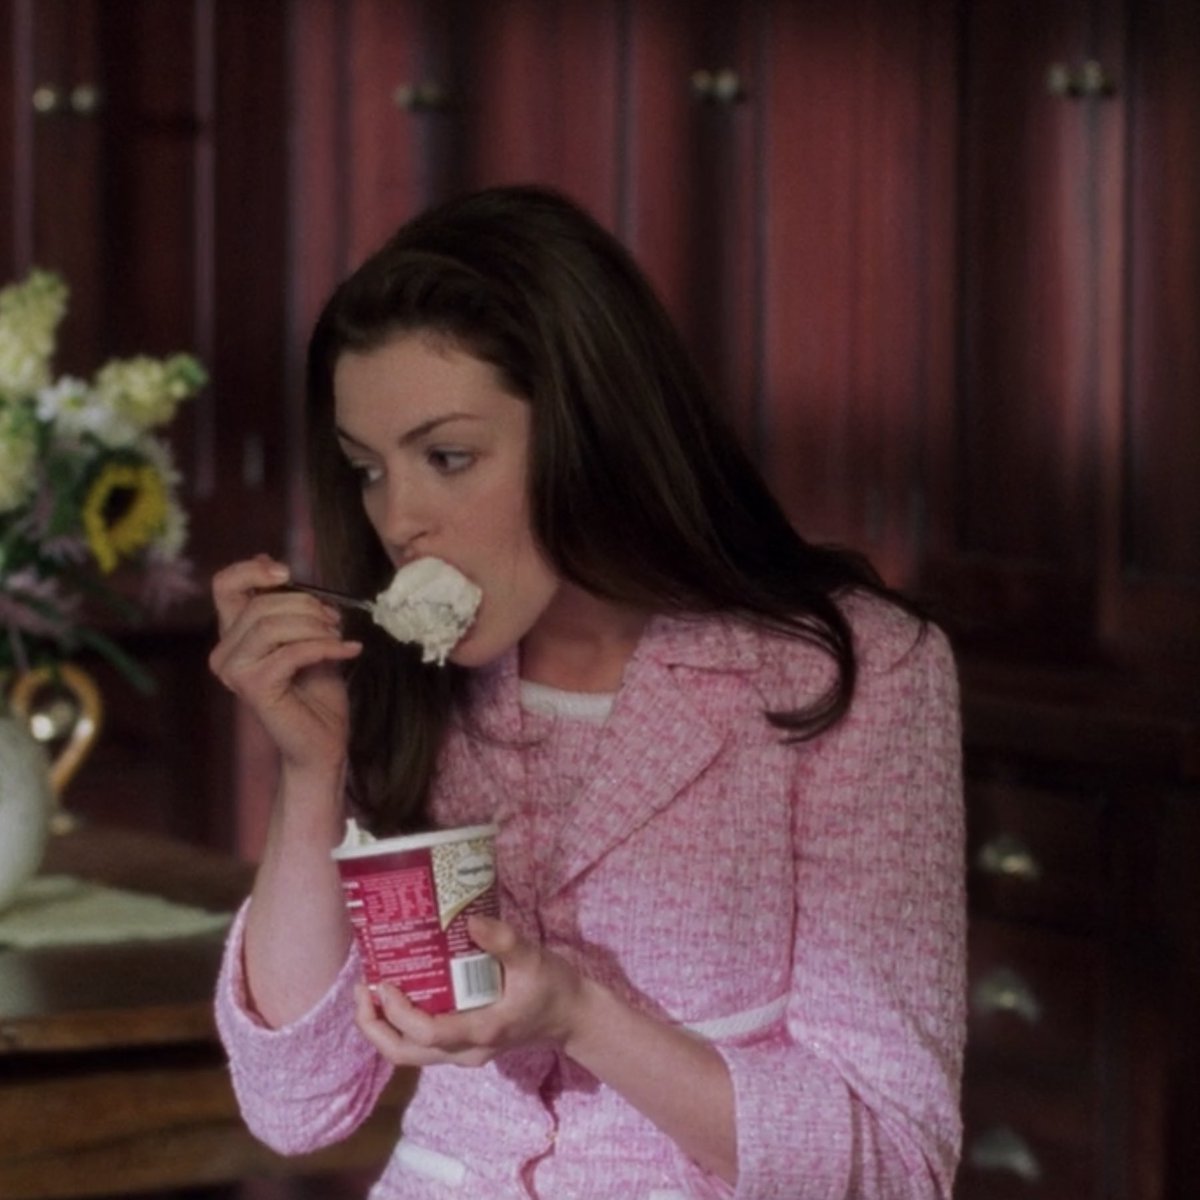 When I say I have been waiting ~months~ to post this… The discipline. The patience. The adult self-control. Happy #NationalIceCreamDay to everyone, but specifically Anne Hathaway.